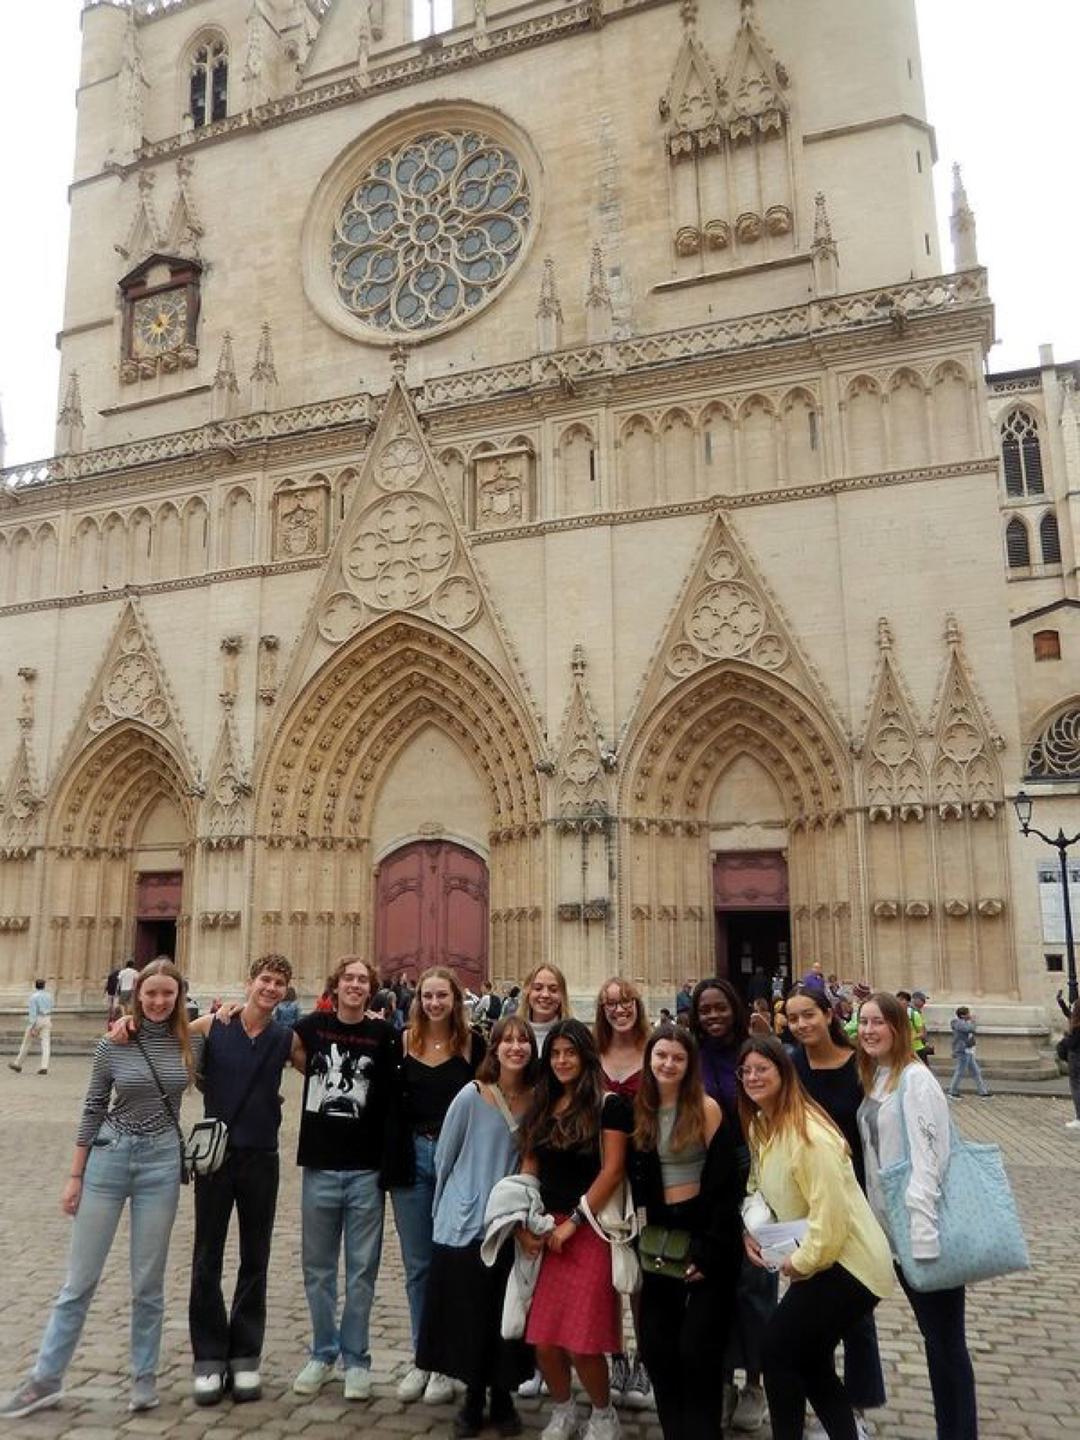 A group of students poses in front of a church.